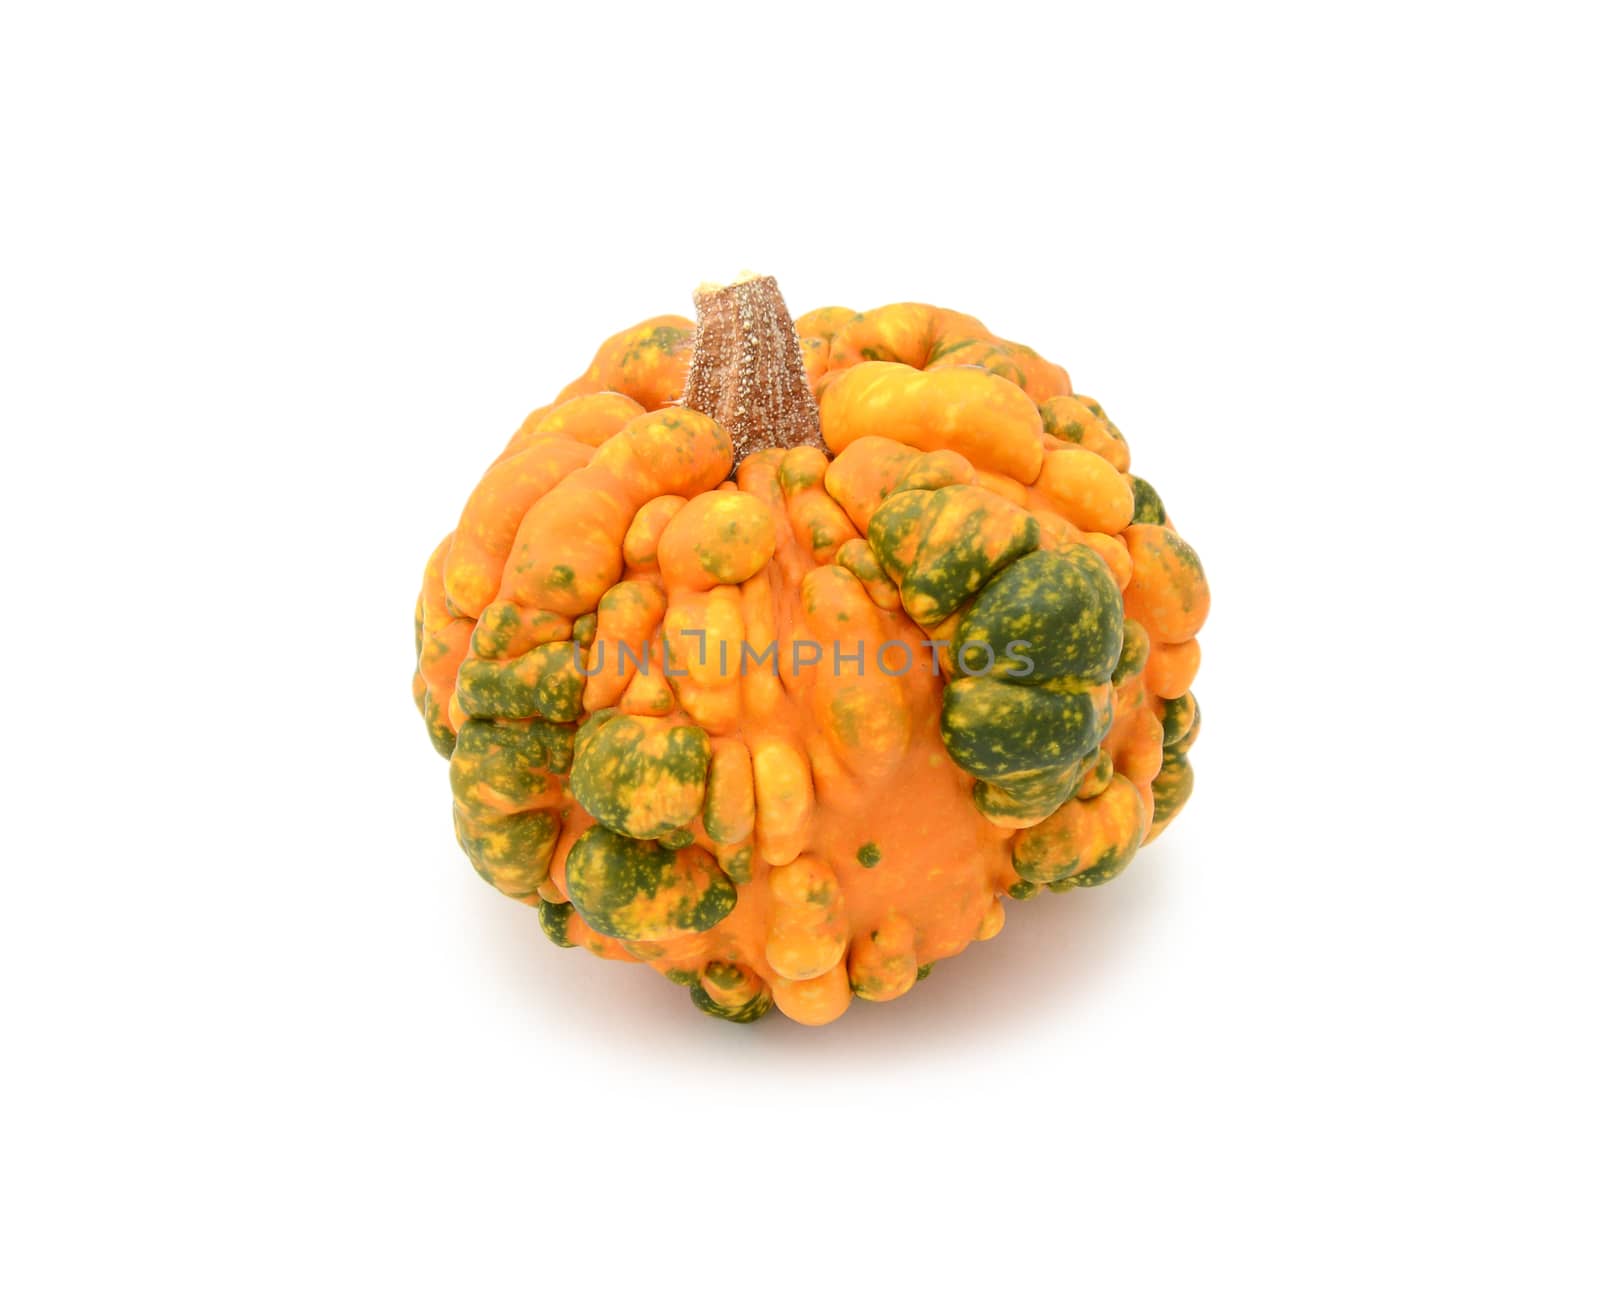 Deep orange gourd with green patches and warty skin by sarahdoow